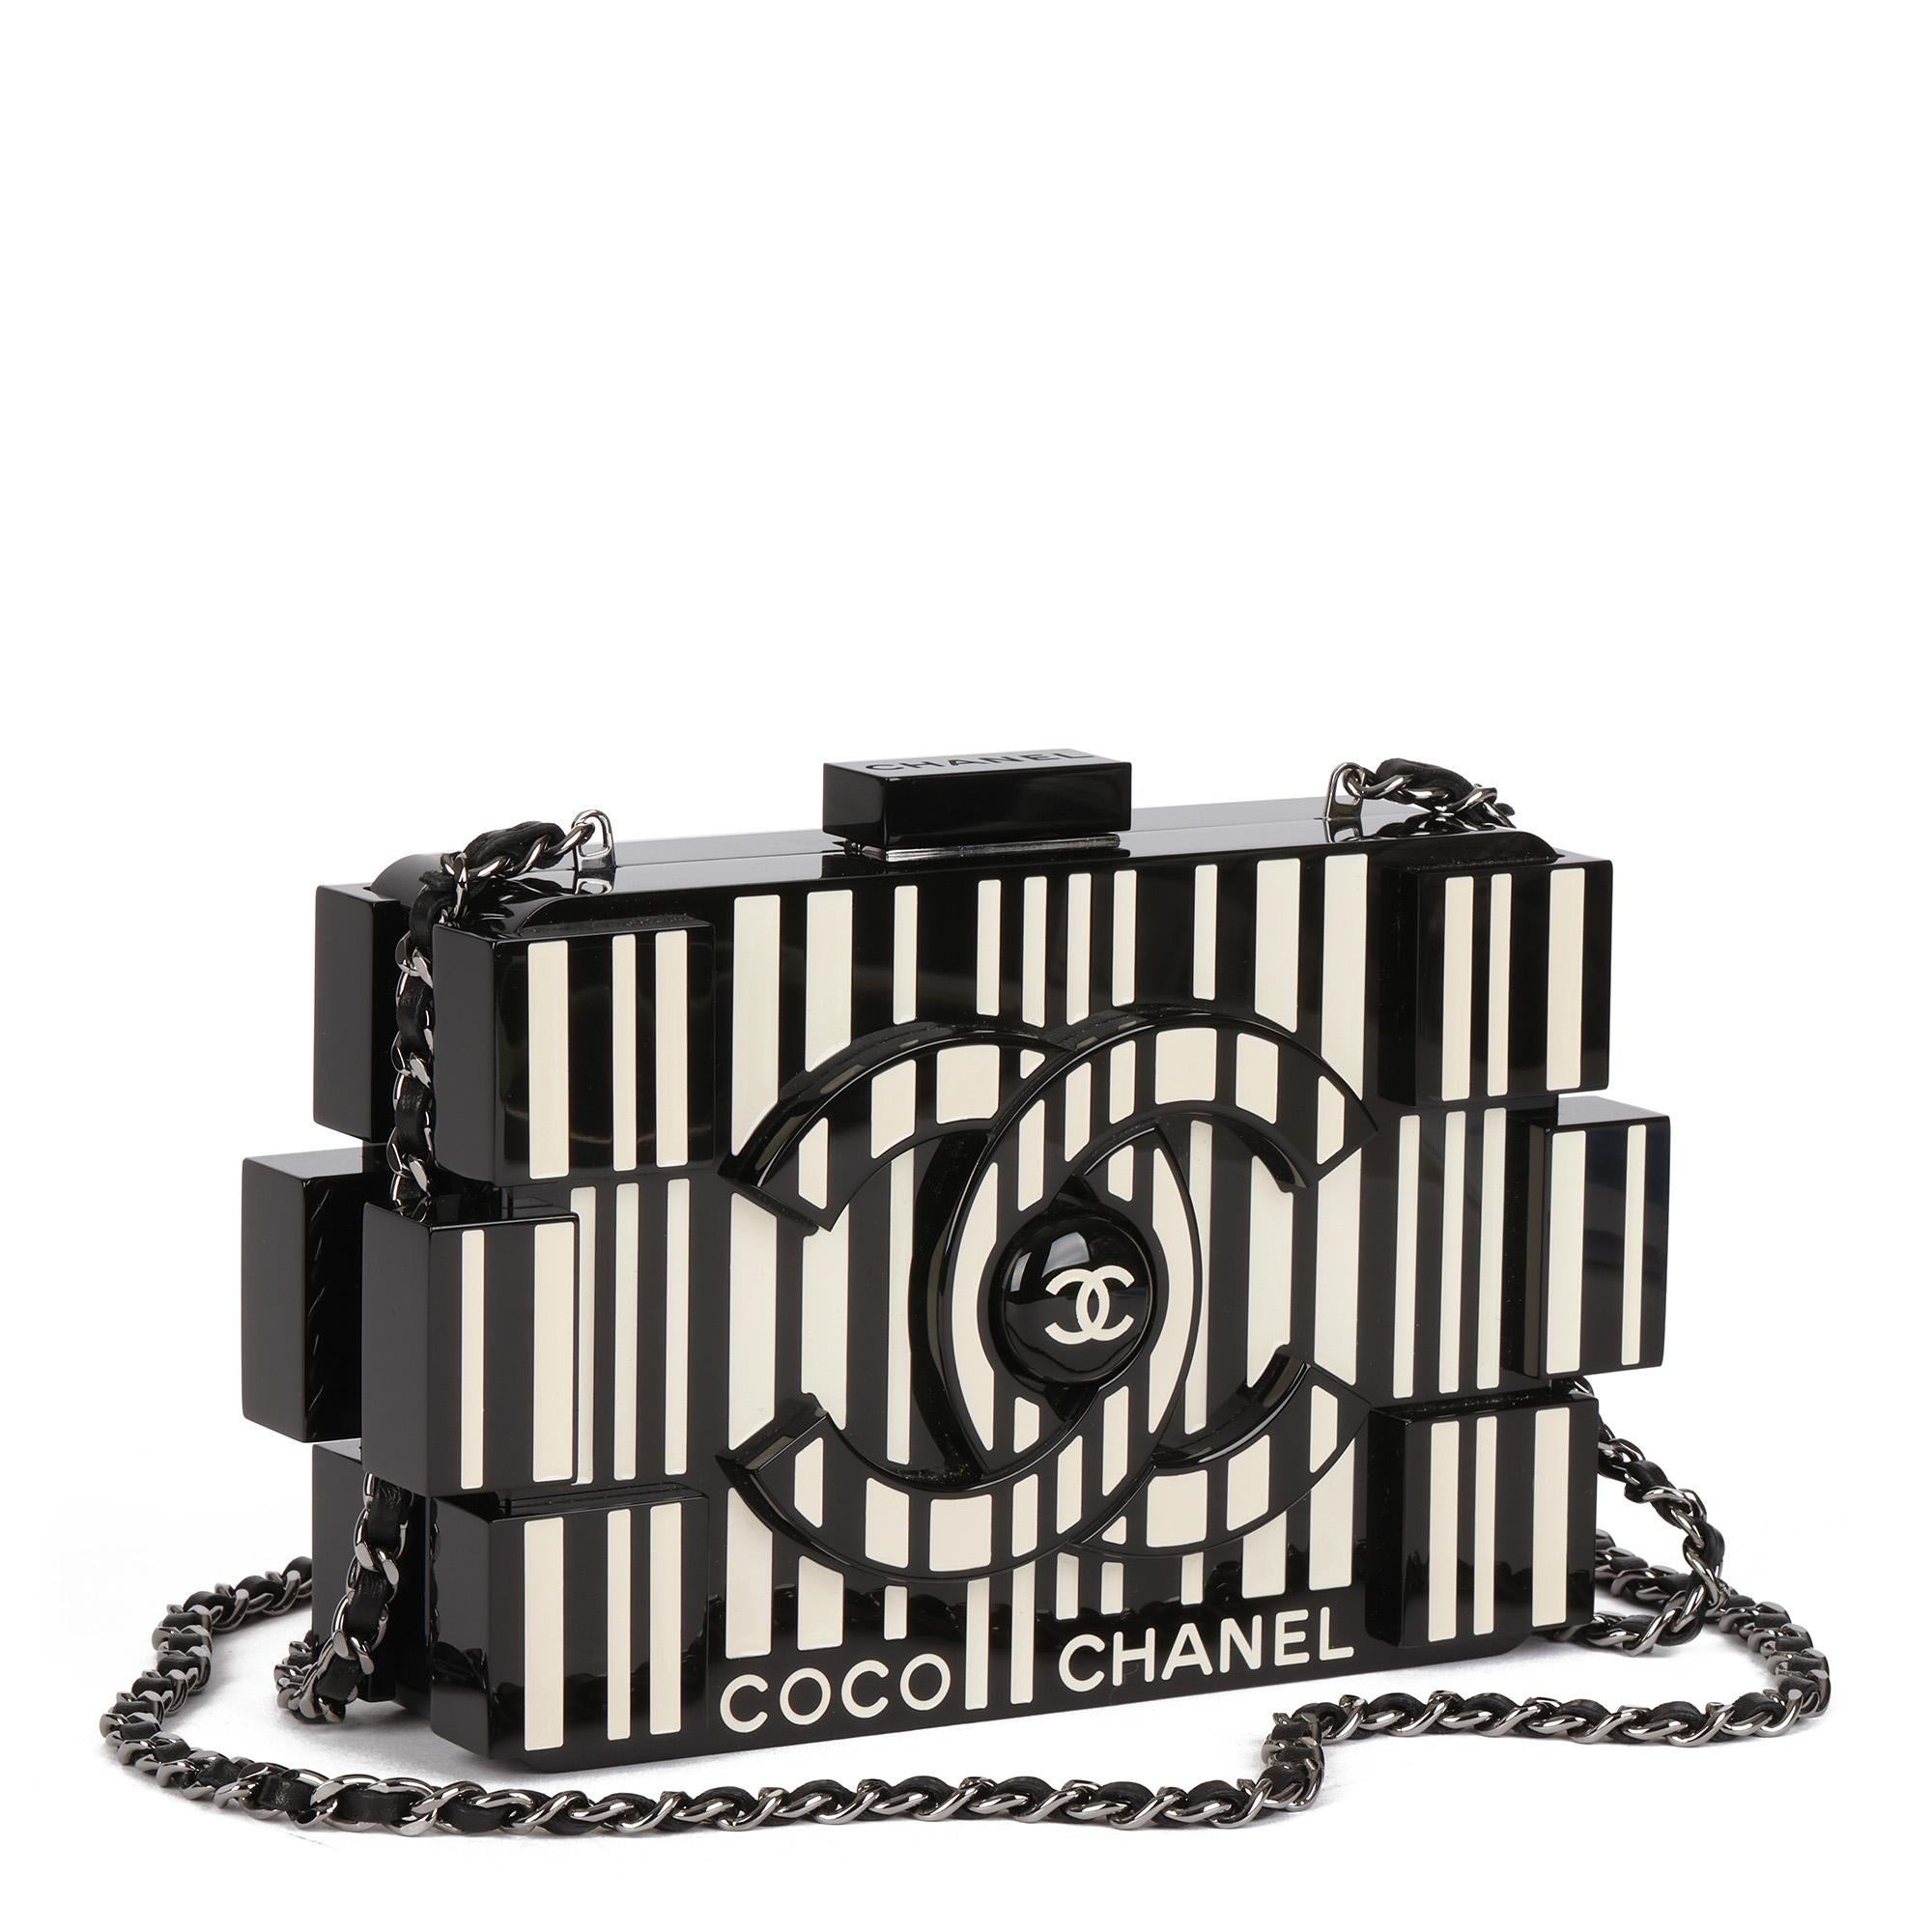 CHANEL
Black & White Plexiglass Barcode Lego Minaudière Clutch

Xupes Reference: CB576
Serial Number: 20564428
Age (Circa): 2015
Accompanied By: Chanel Dust Bag, Box, Authenticity Card
Authenticity Details: Authenticity Card, Serial Sticker (Made in